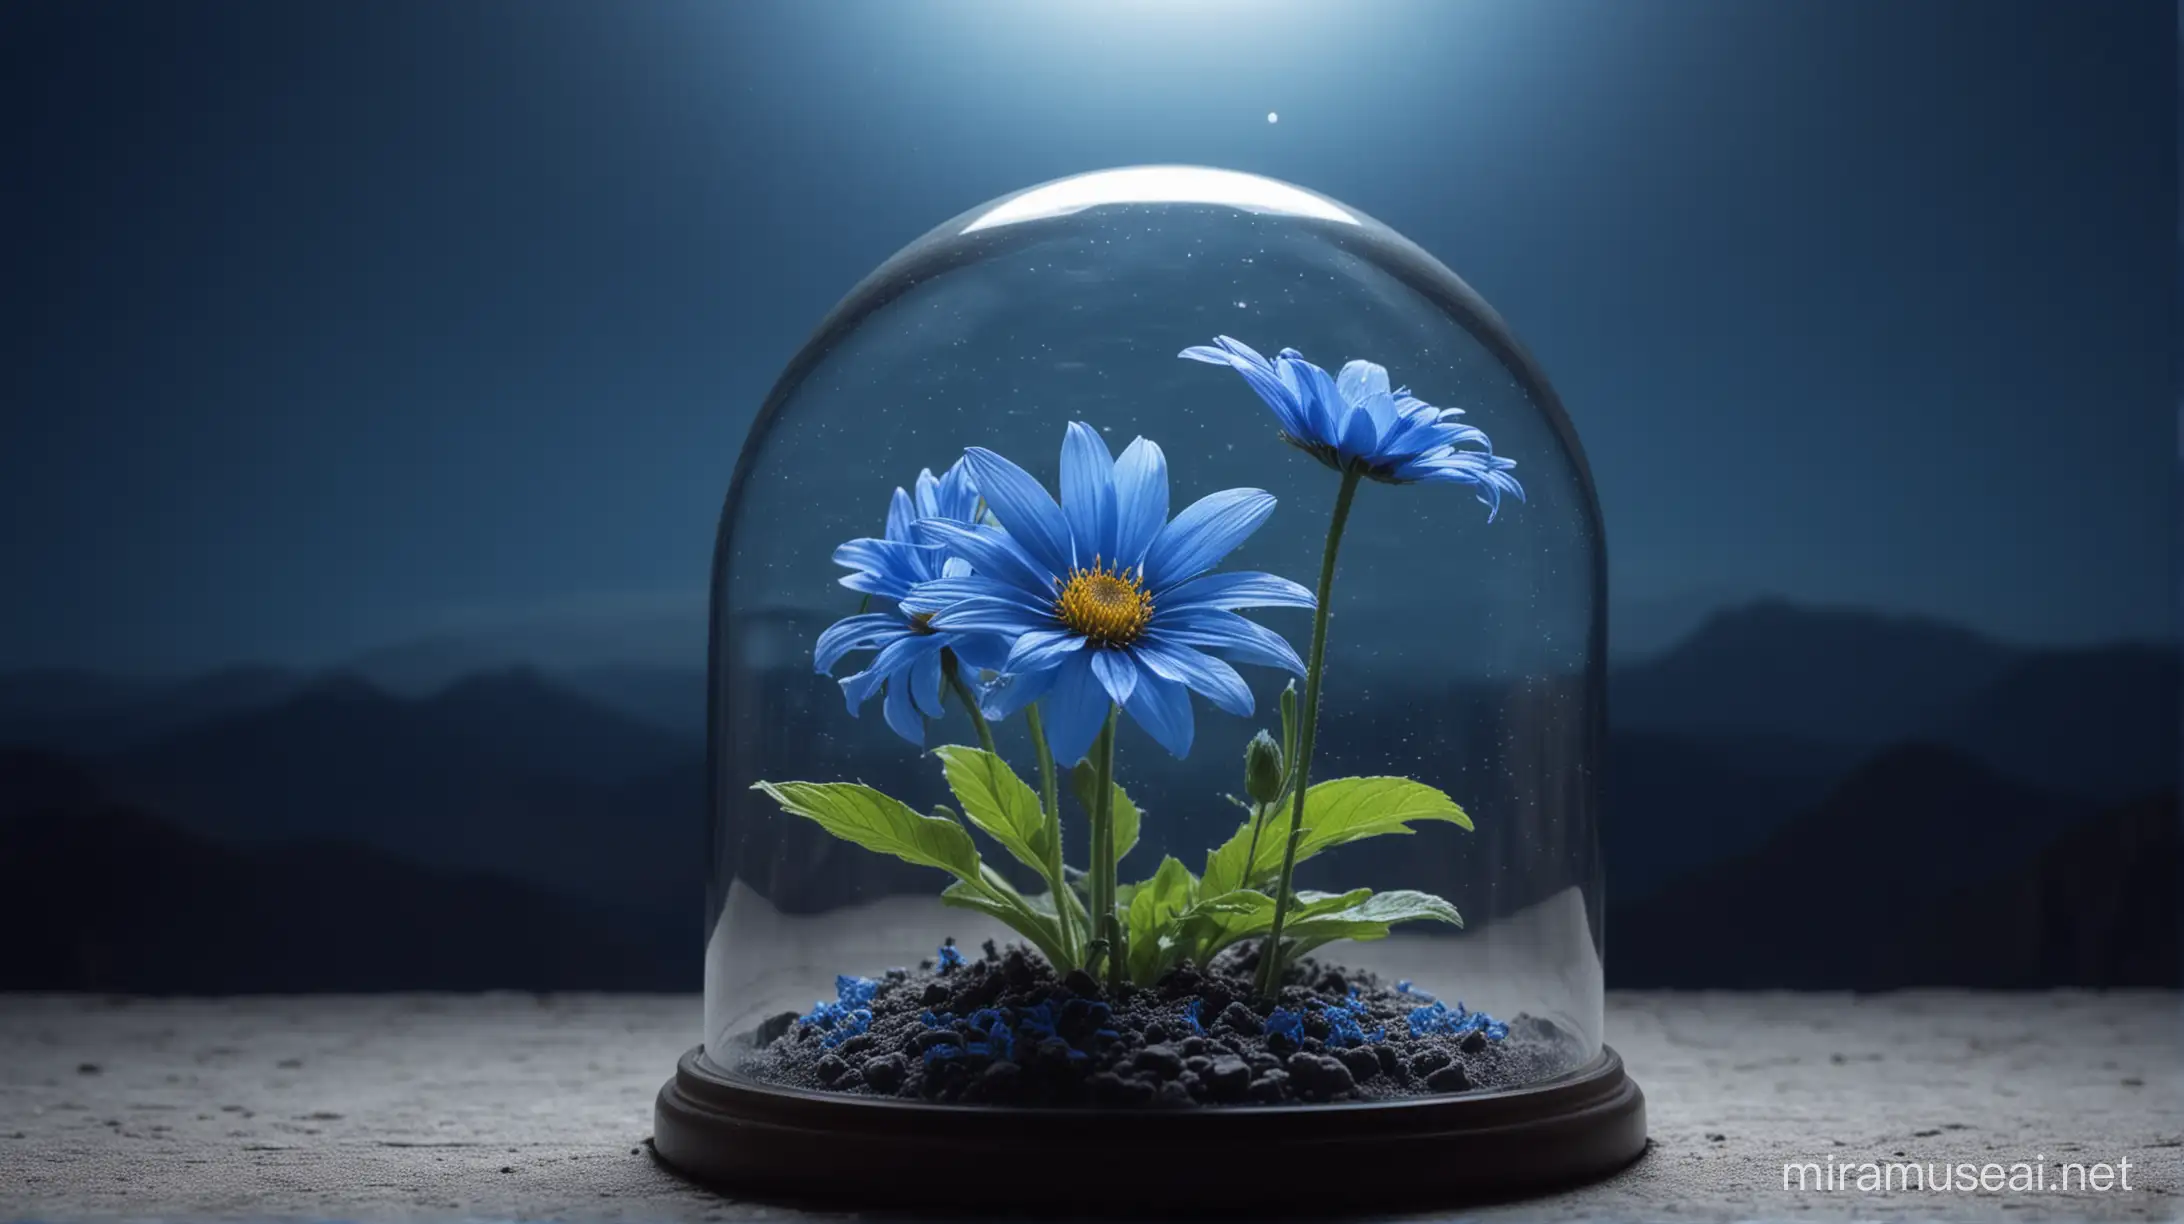 Blue Flower Under Glass Dome on Moon Surface